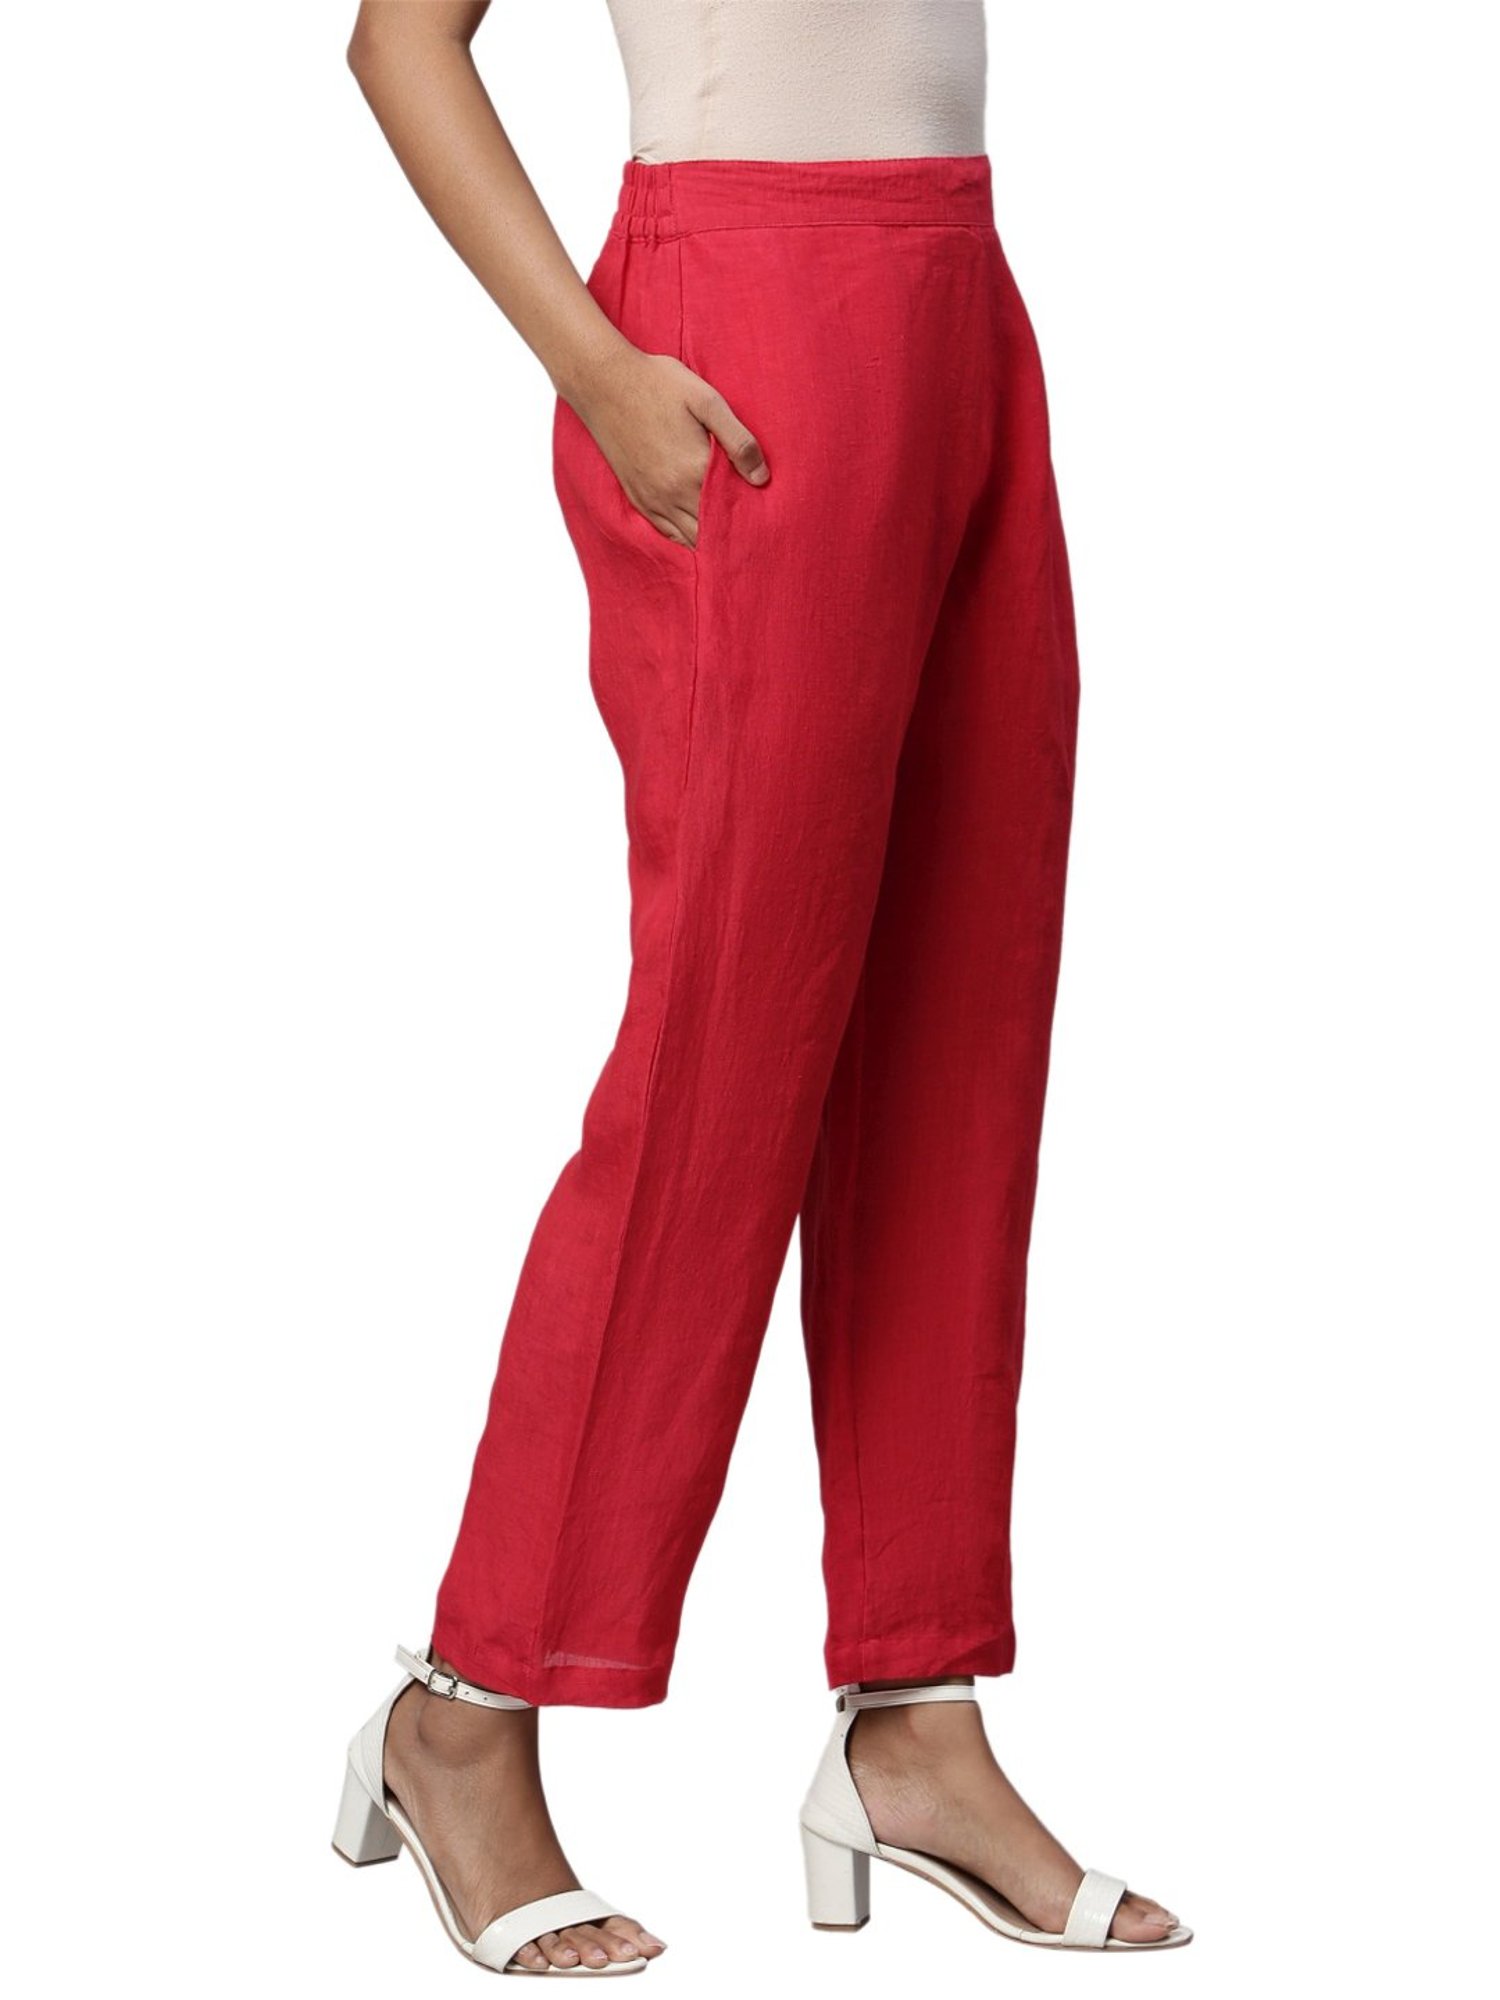 Buy Red Solid Pants Online - W for Woman